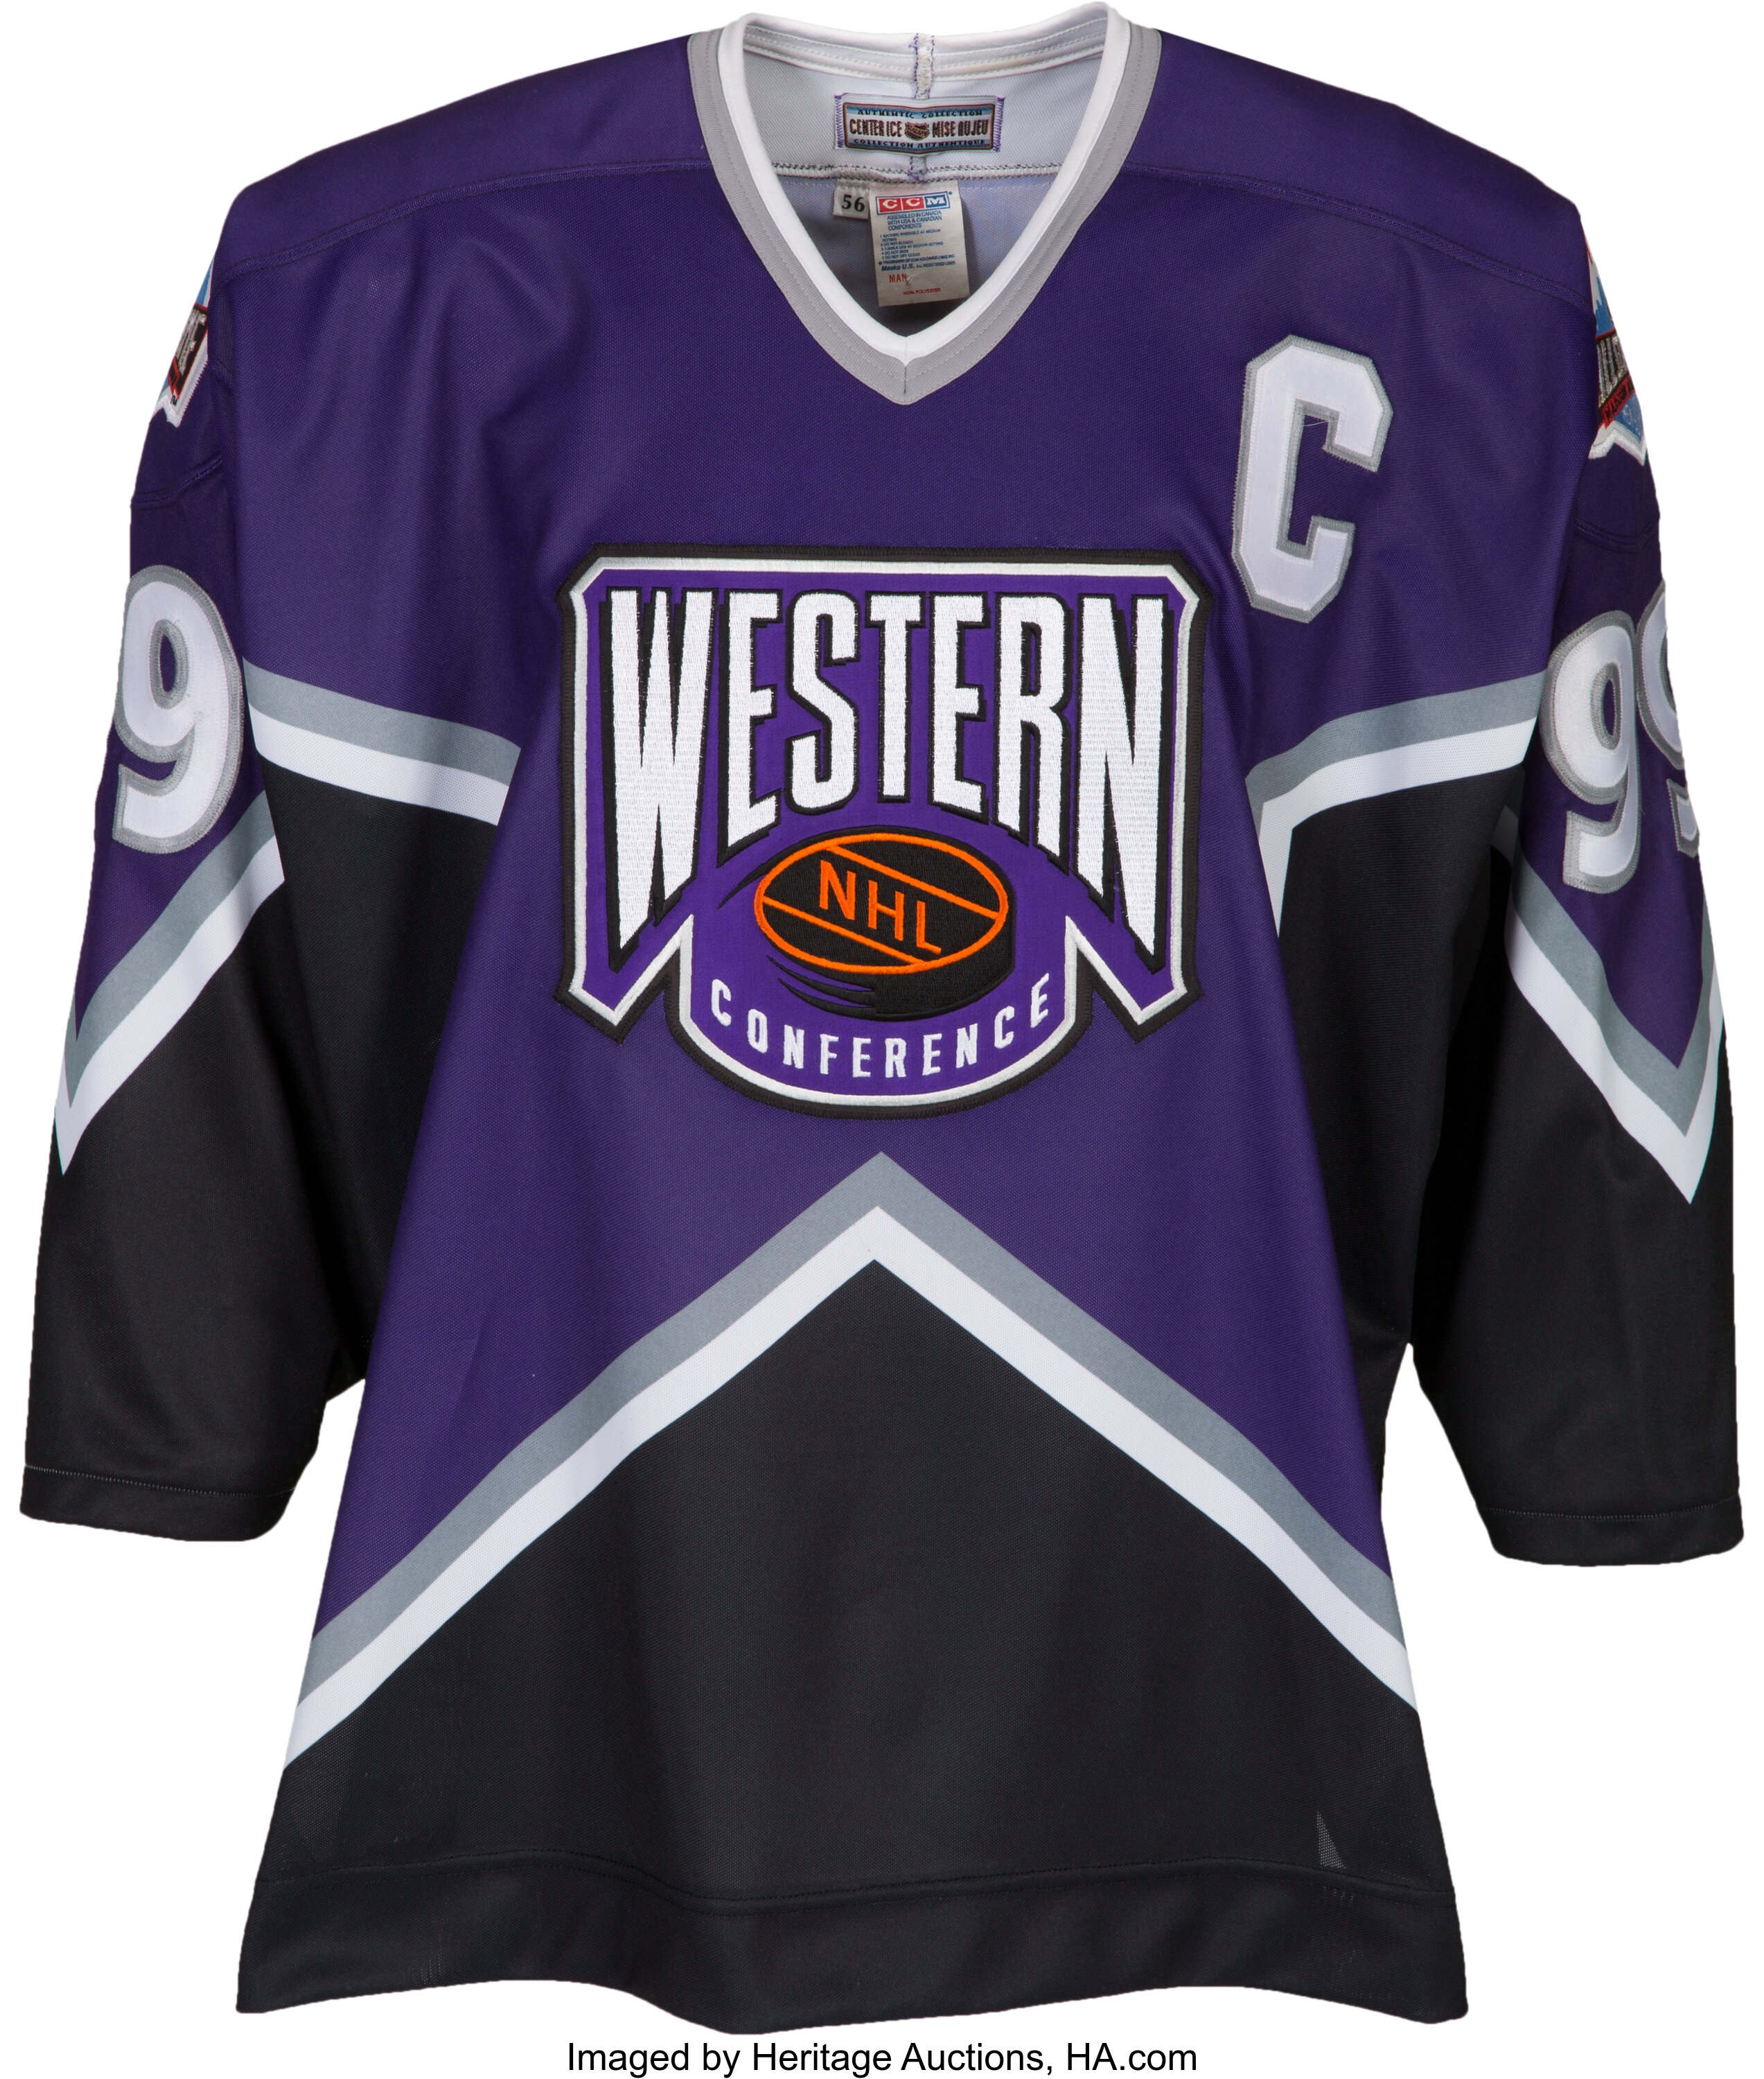 All-Star Game 1994-97 - The (unofficial) NHL Uniform Database